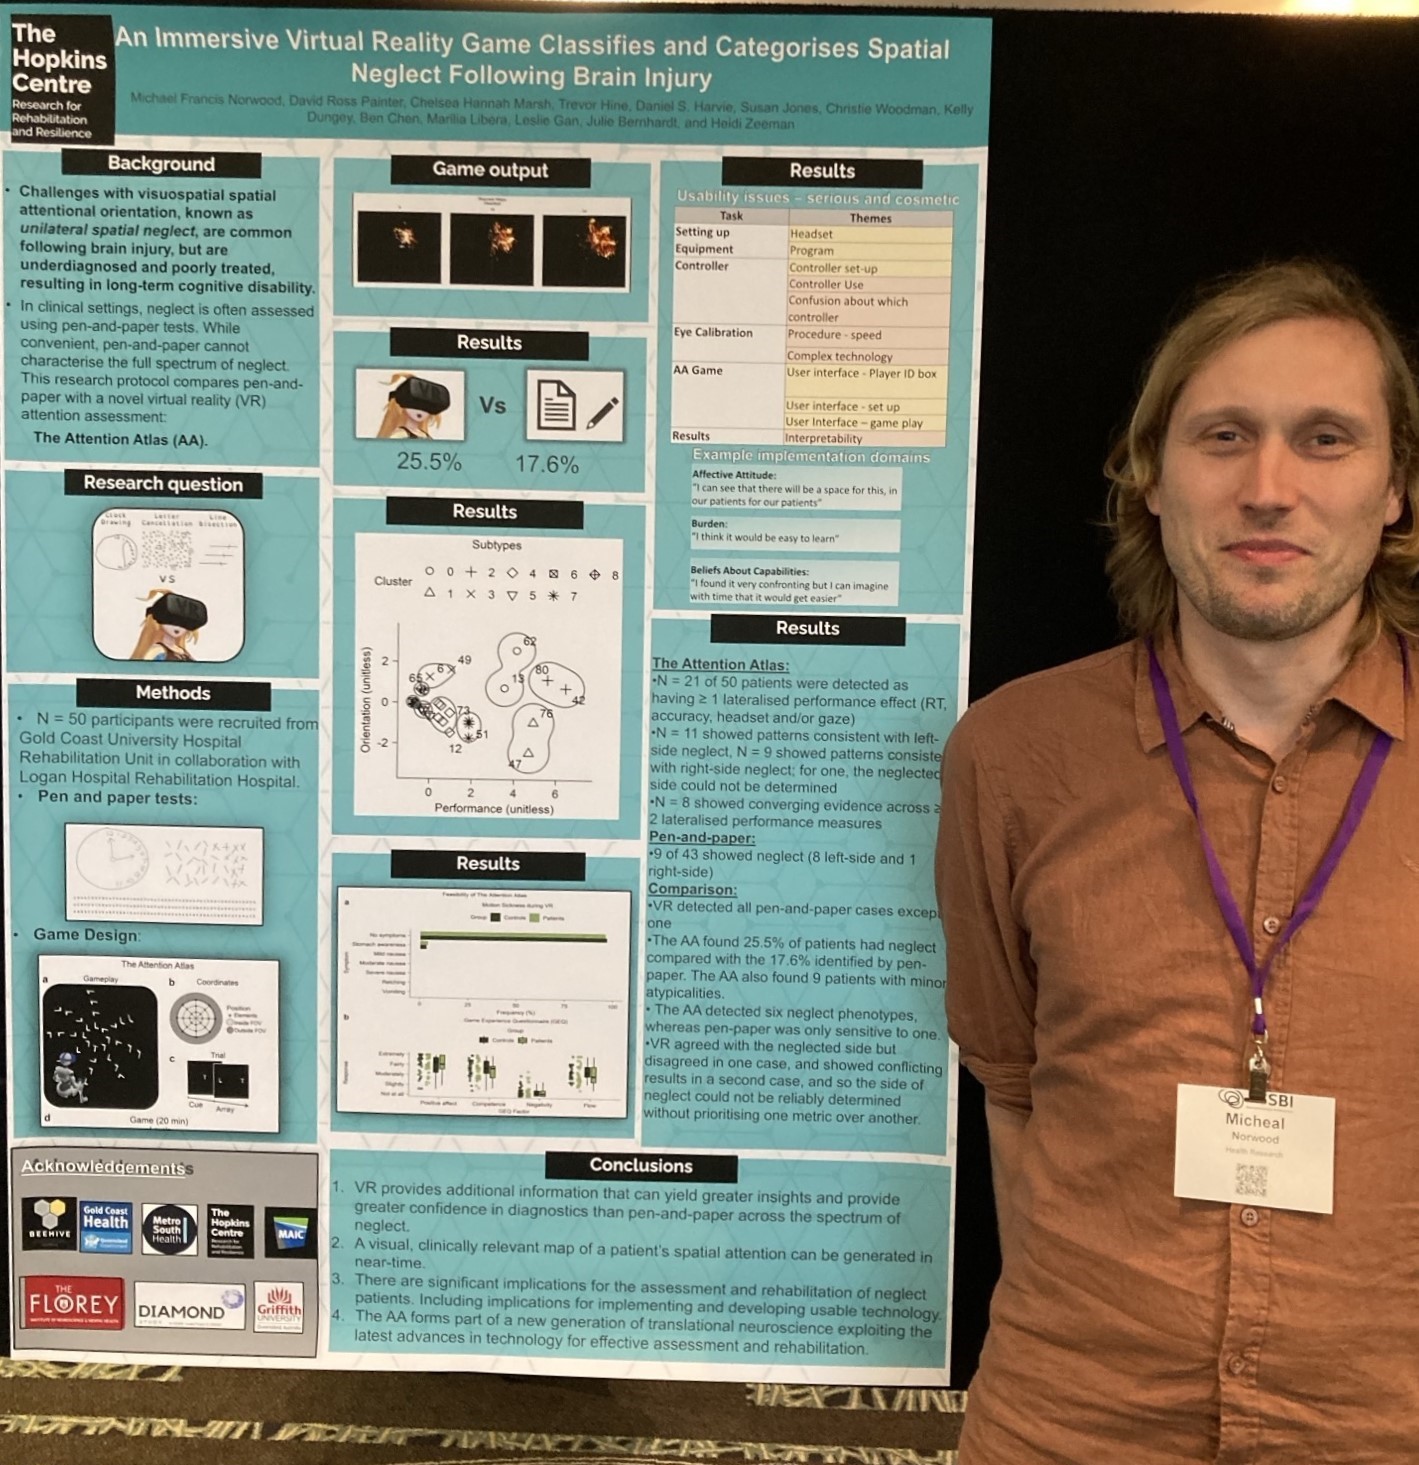 Dr Mike Norwood, wearing a brown collared shirt, standing in front of his poster titled "An Immersive Virtual Reality Game Classifies and Categorises Spatial Neglect Following Brain Injury"